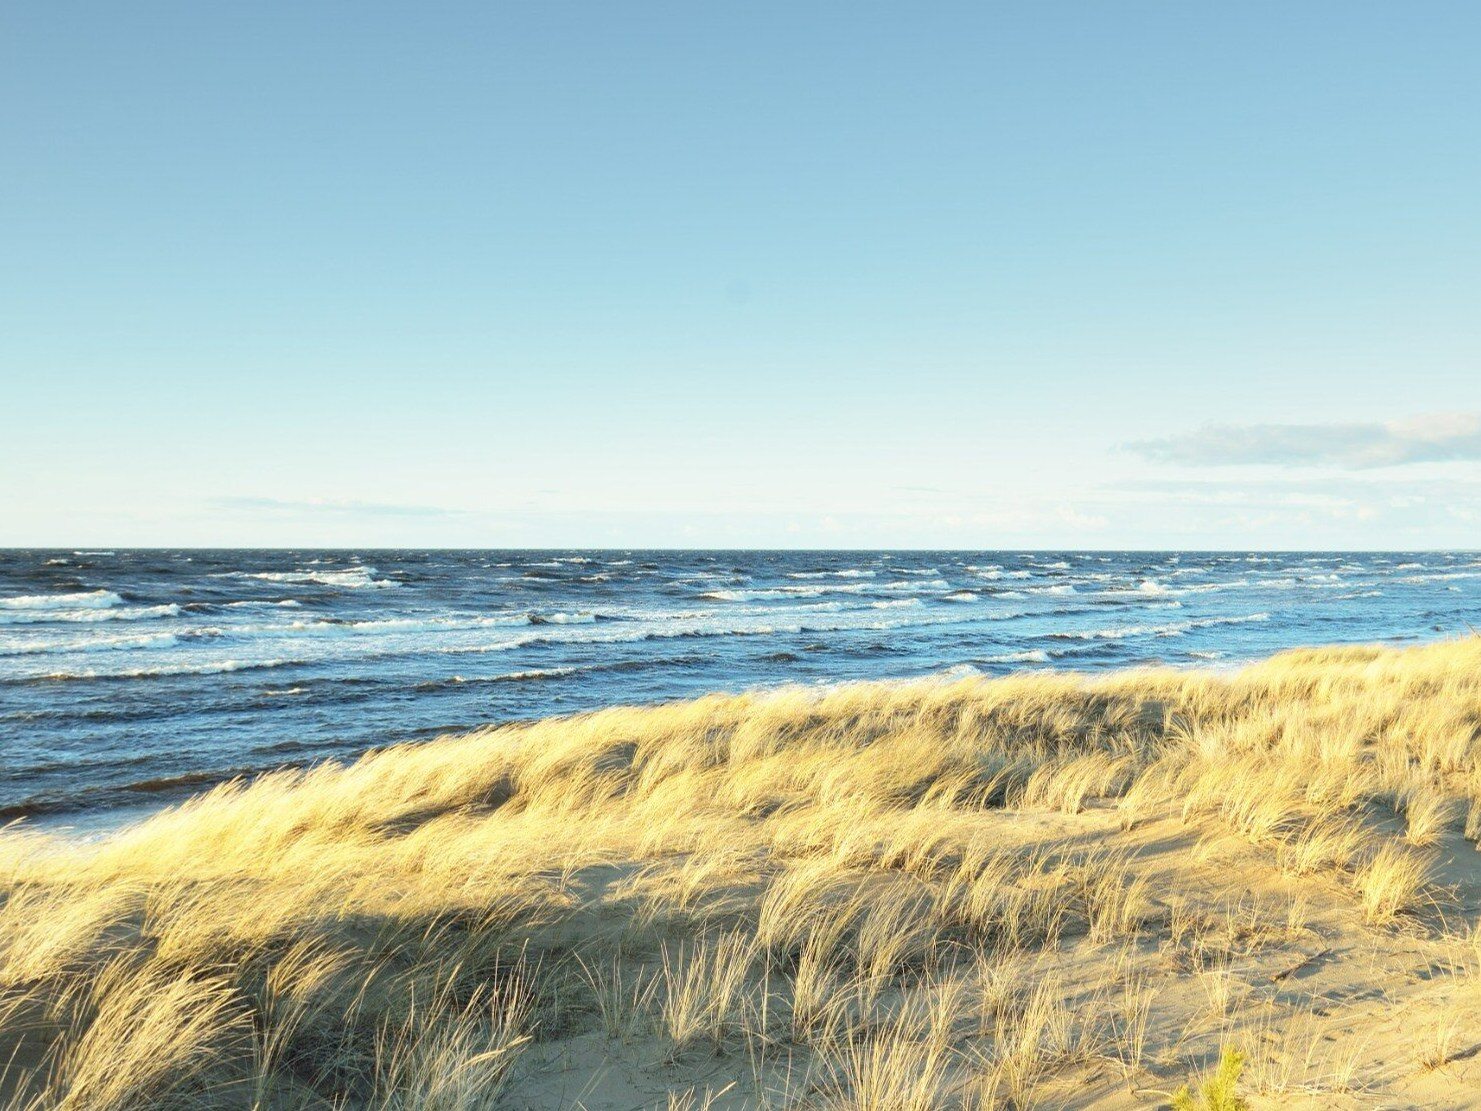 The Baltic Sea is becoming more and more polluted.  "Rinse water" is to blame